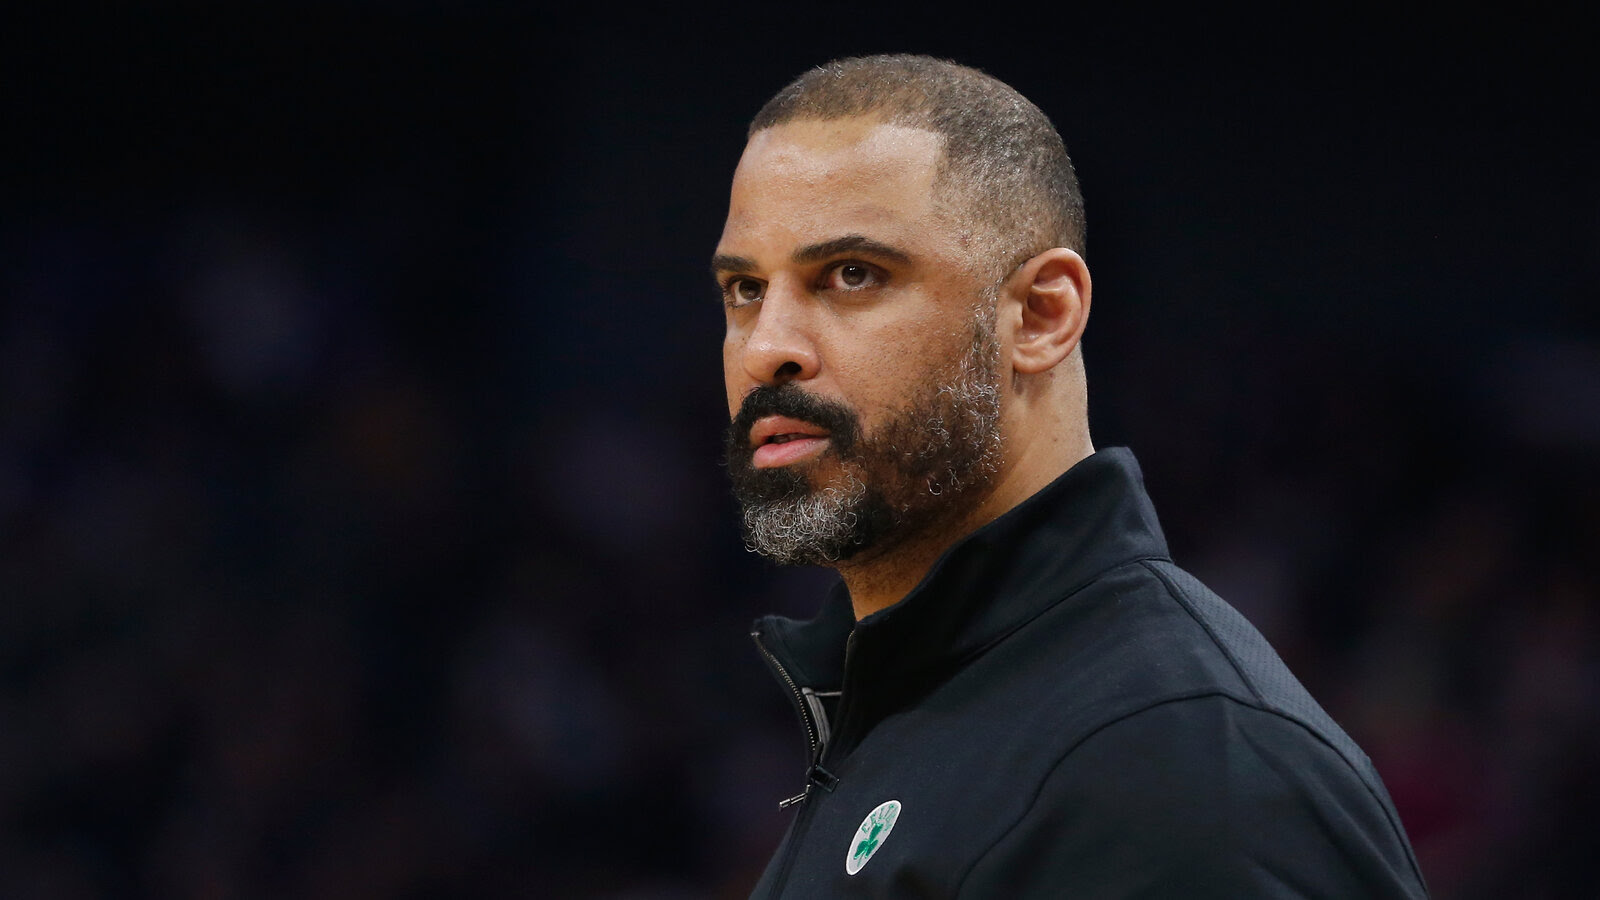 Celtics Say Suspending Coach Ime Udoka Was a Matter of ‘Conscience’